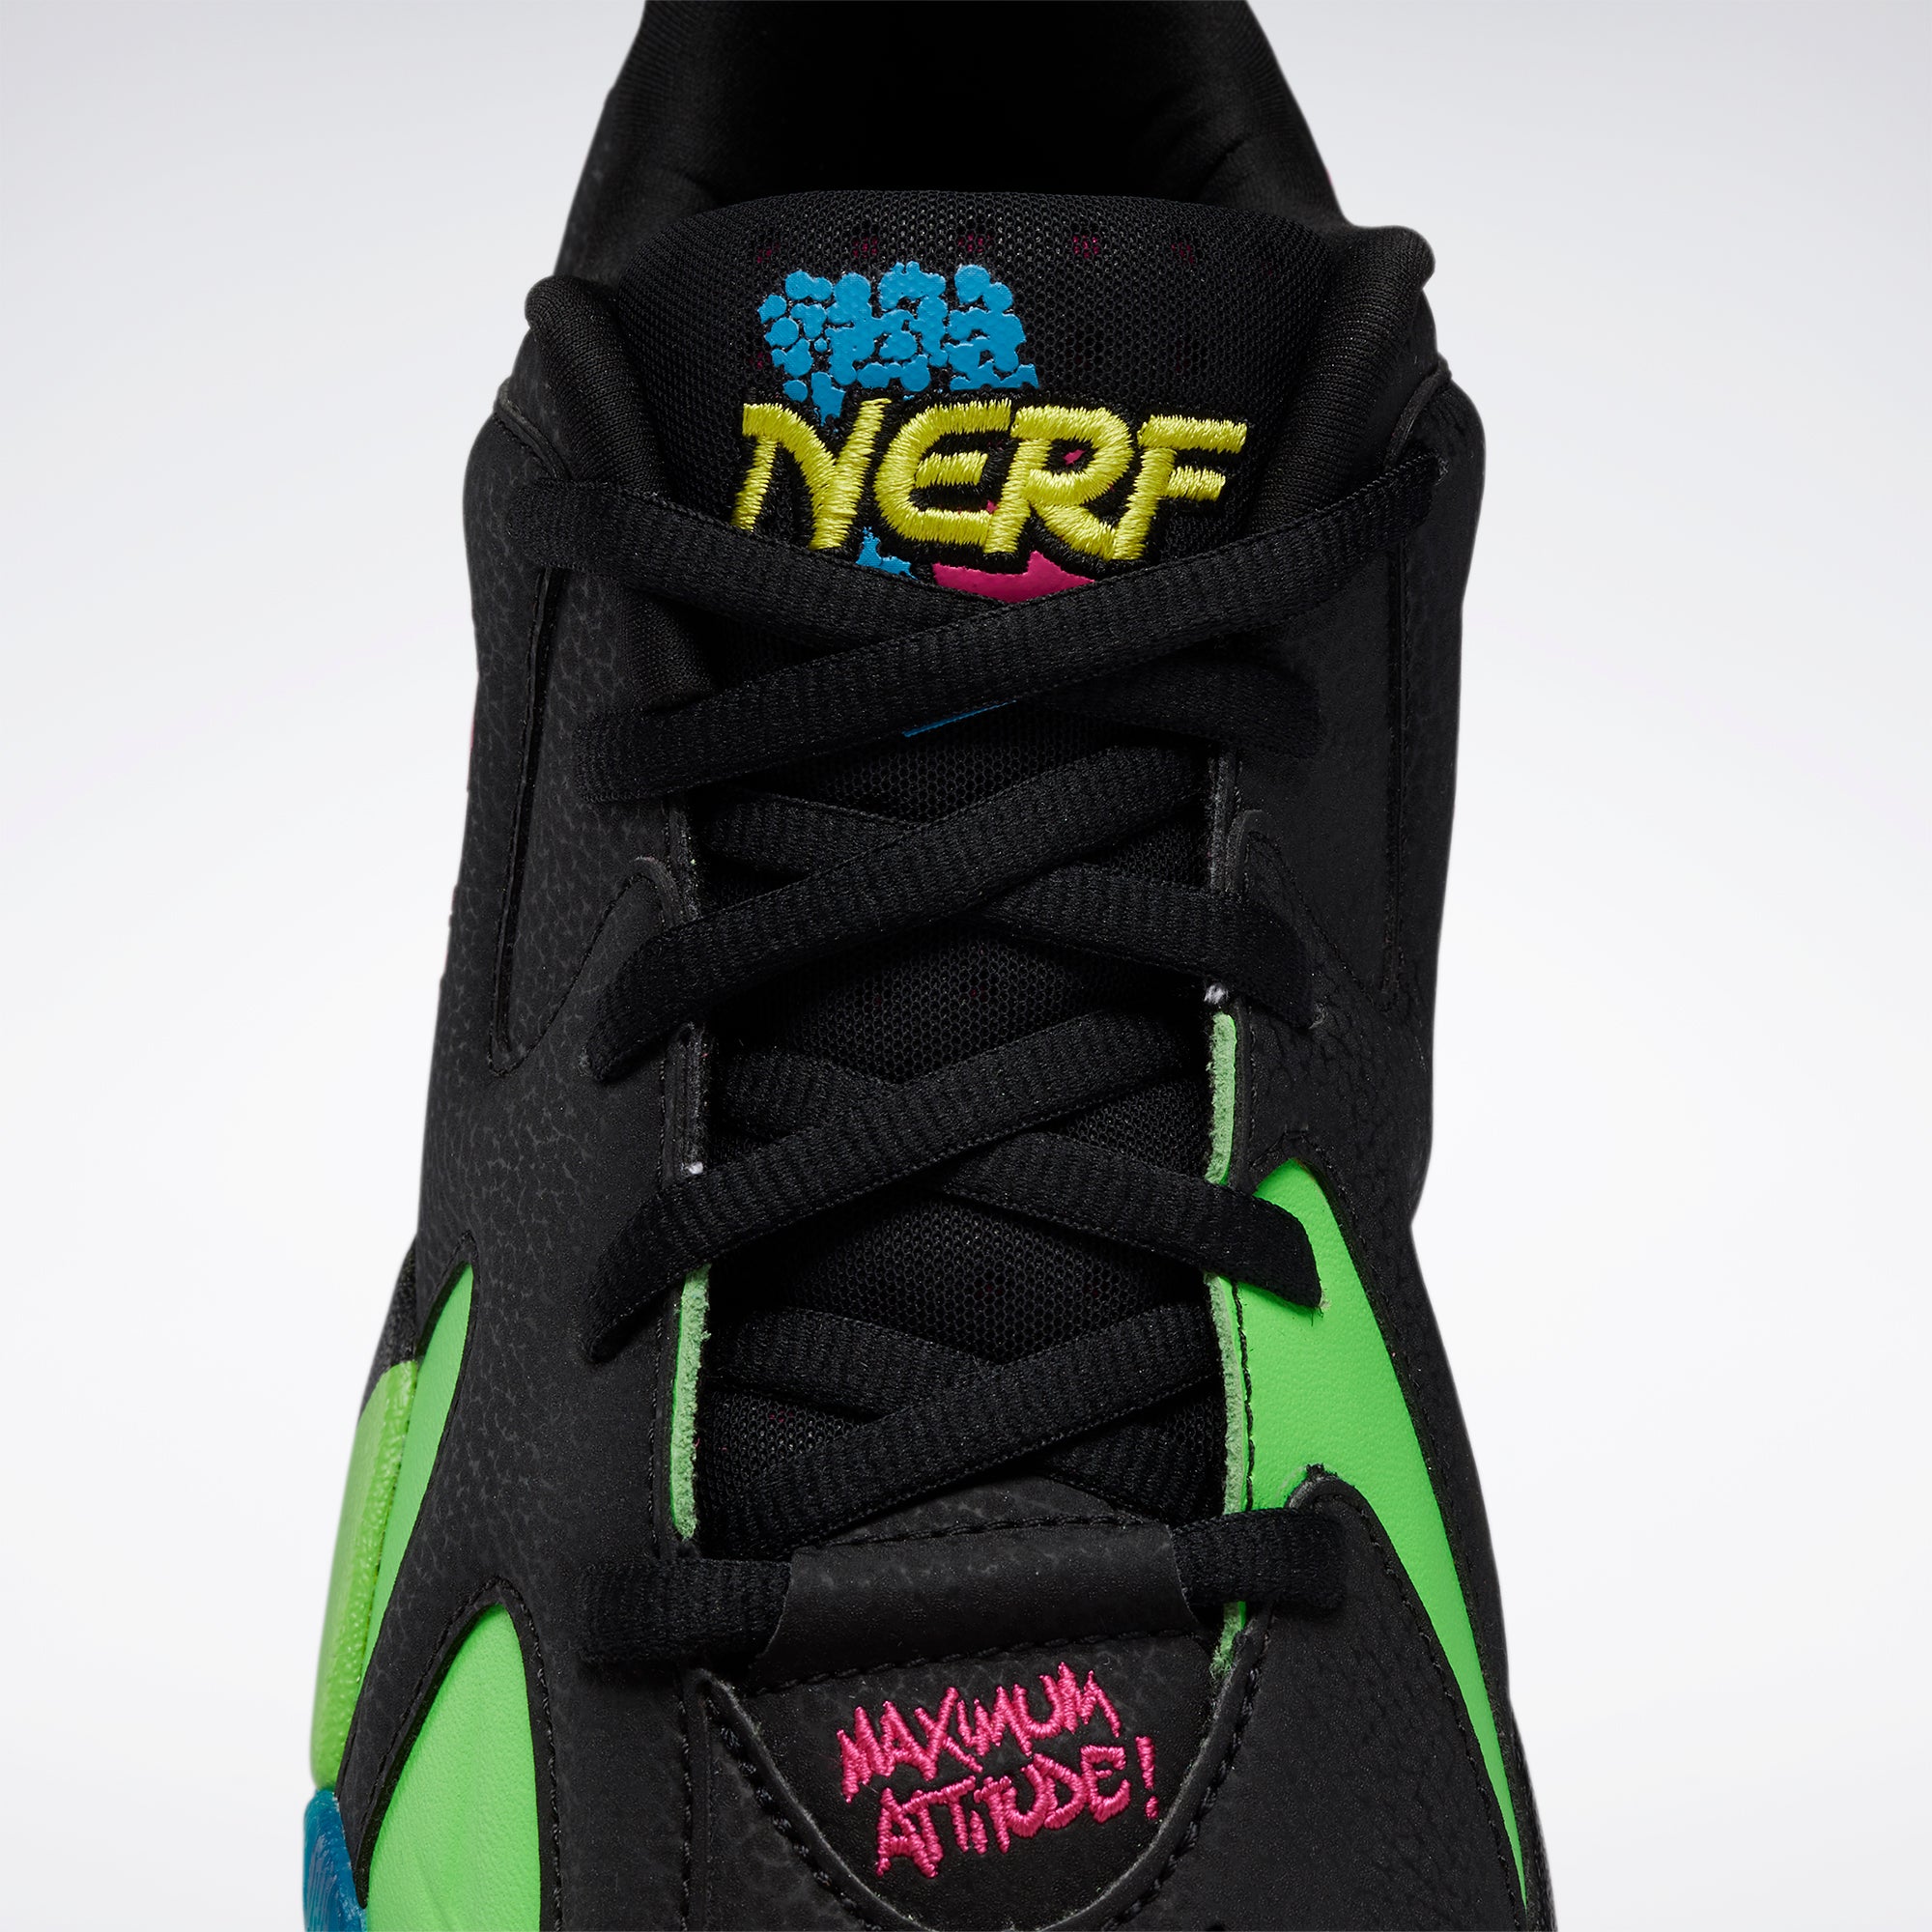 Nerf Kamikaze II Low Men's Basketball Shoes (GV7743) with Free Nerf Nerfoop